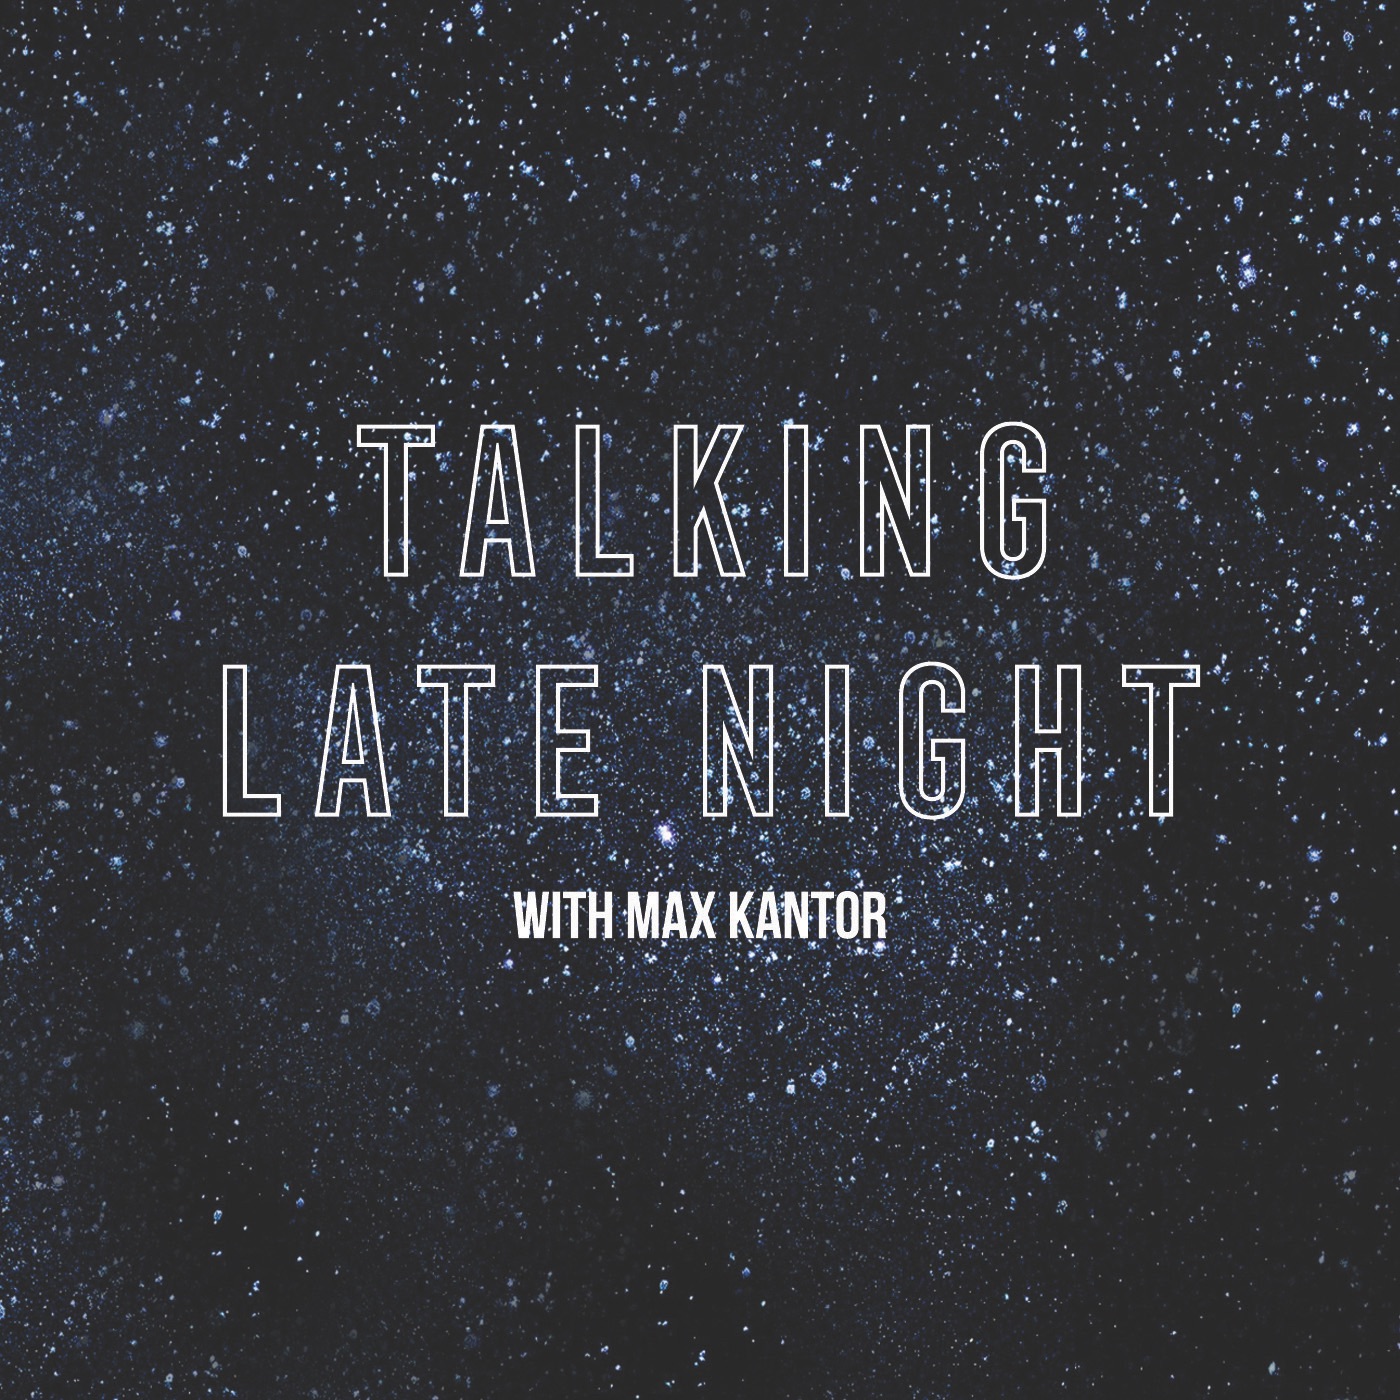 Late Night talking. Late Talker книги. All Night the influence. Talking to the night